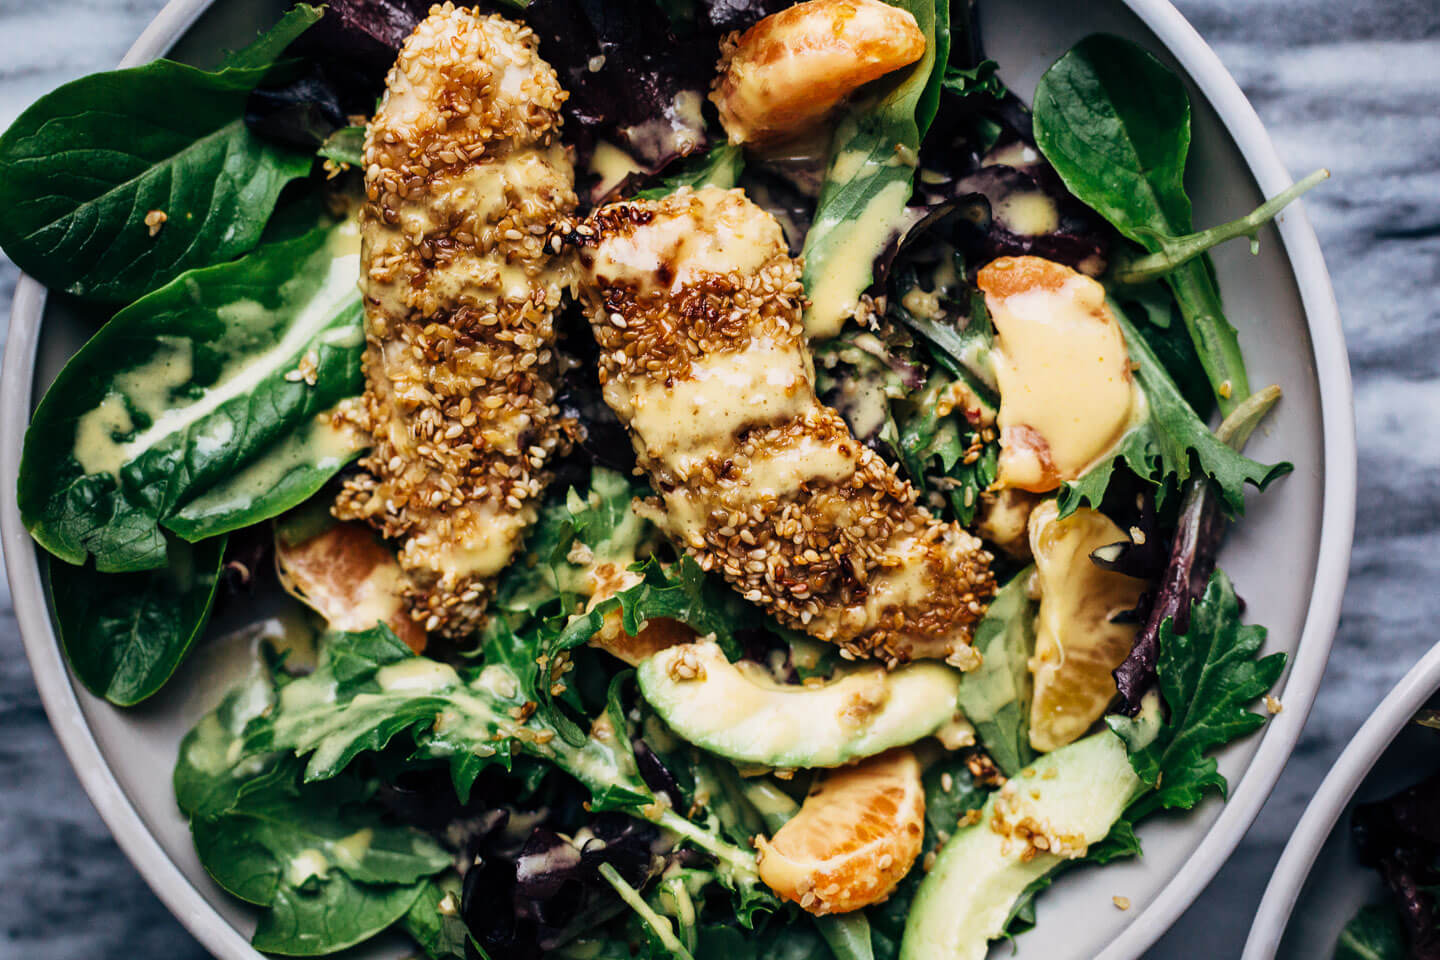 A healthful, Whole30-compliant avocado and mandarin orange salad topped with crisp sesame-crusted baked chicken tenders and drizzled with a creamy mandarin-ginger dressing.